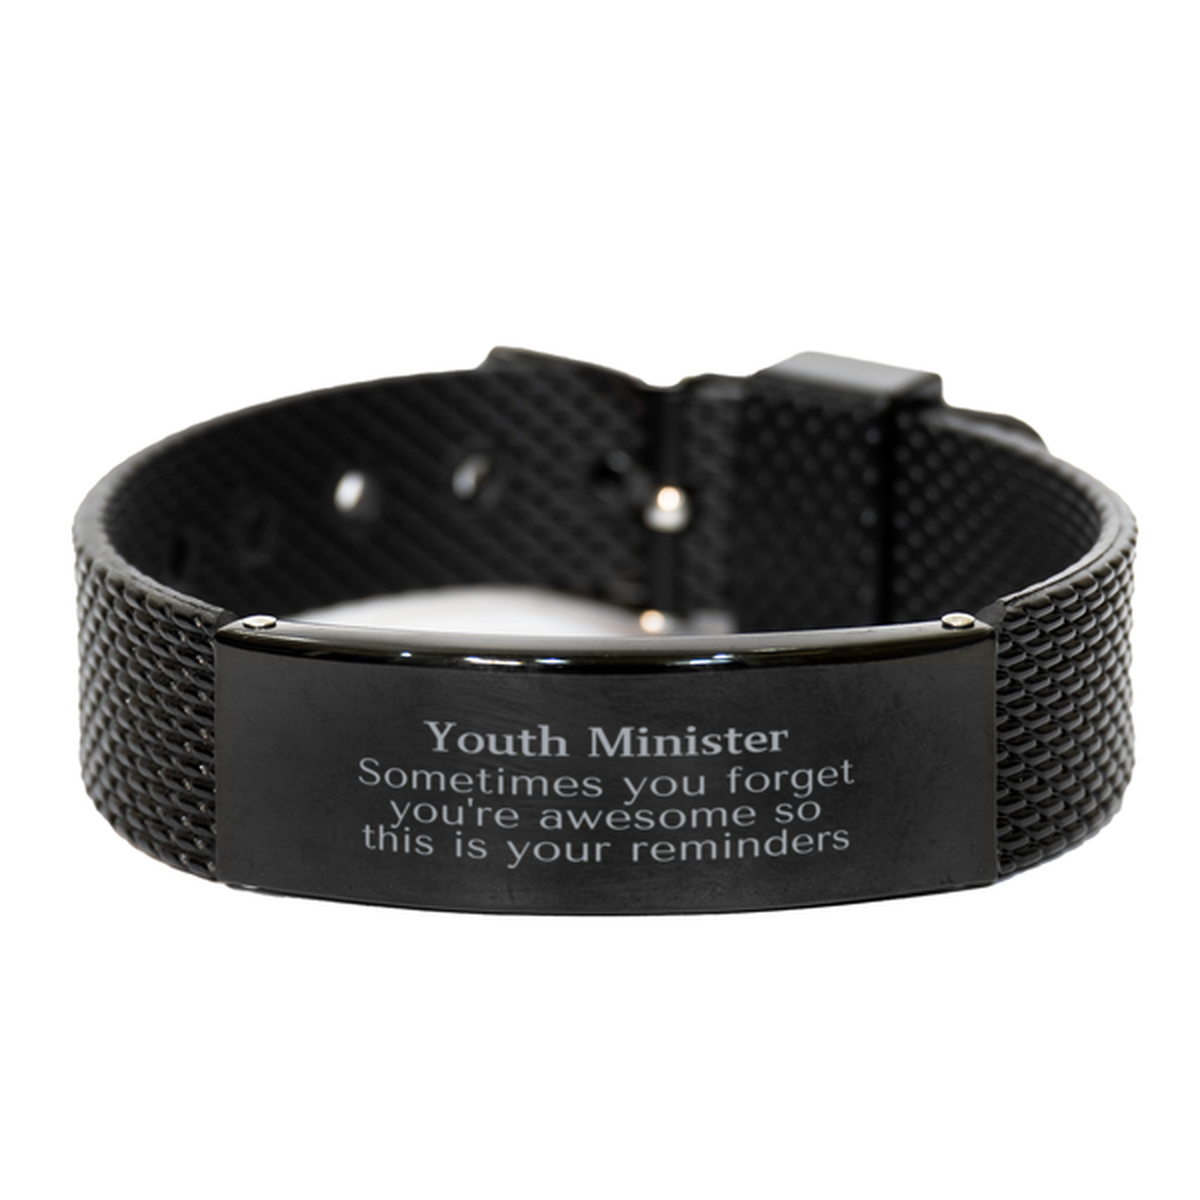 Sentimental Youth Minister Black Shark Mesh Bracelet, Youth Minister Sometimes you forget you're awesome so this is your reminders, Graduation Christmas Birthday Gifts for Youth Minister, Men, Women, Coworkers